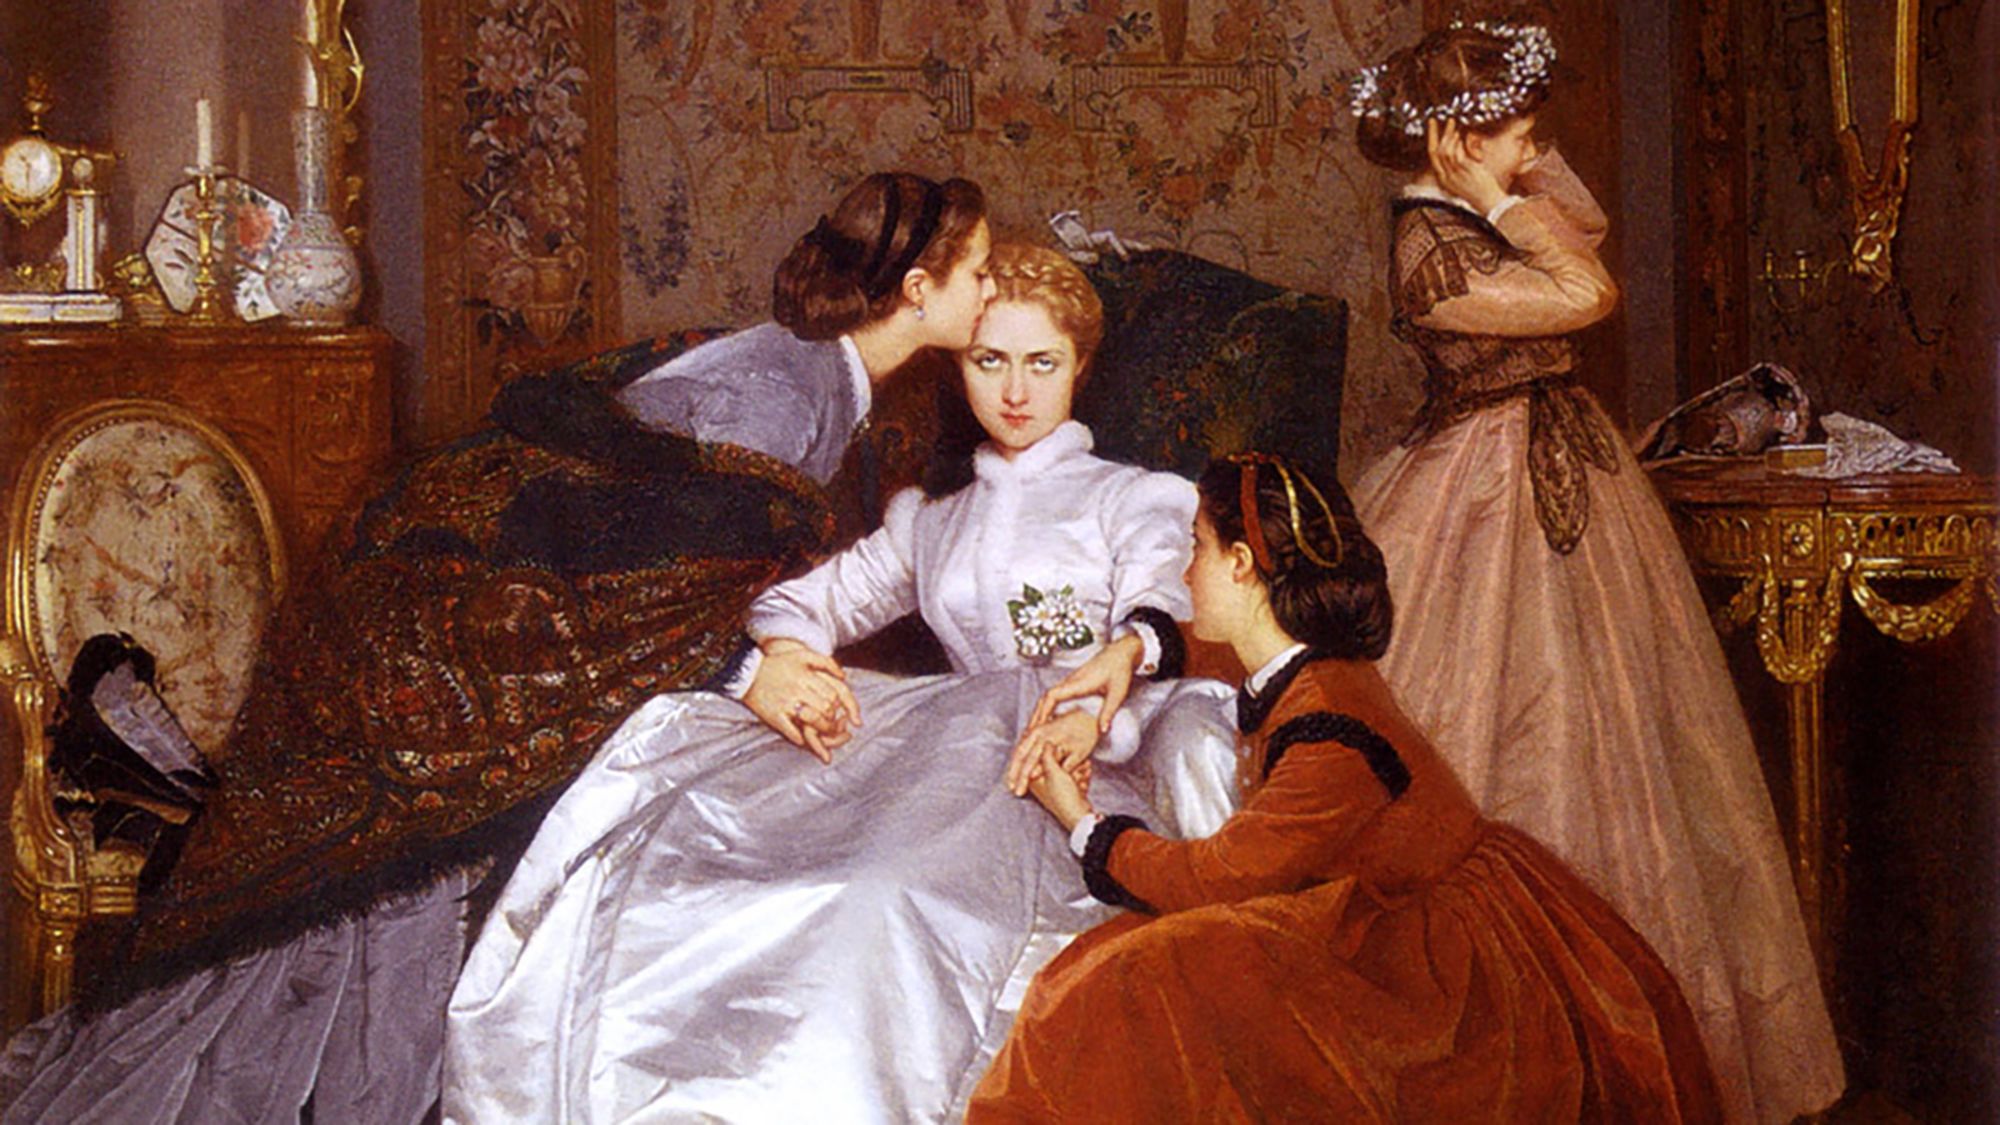 "La Fiancée Hésitante," translated to "The Hesitant Fiancée" or "The Reluctant Bride," is an 1866 painting by French painter Auguste Toulmouche depicting a royally upset woman about to be married against her will.